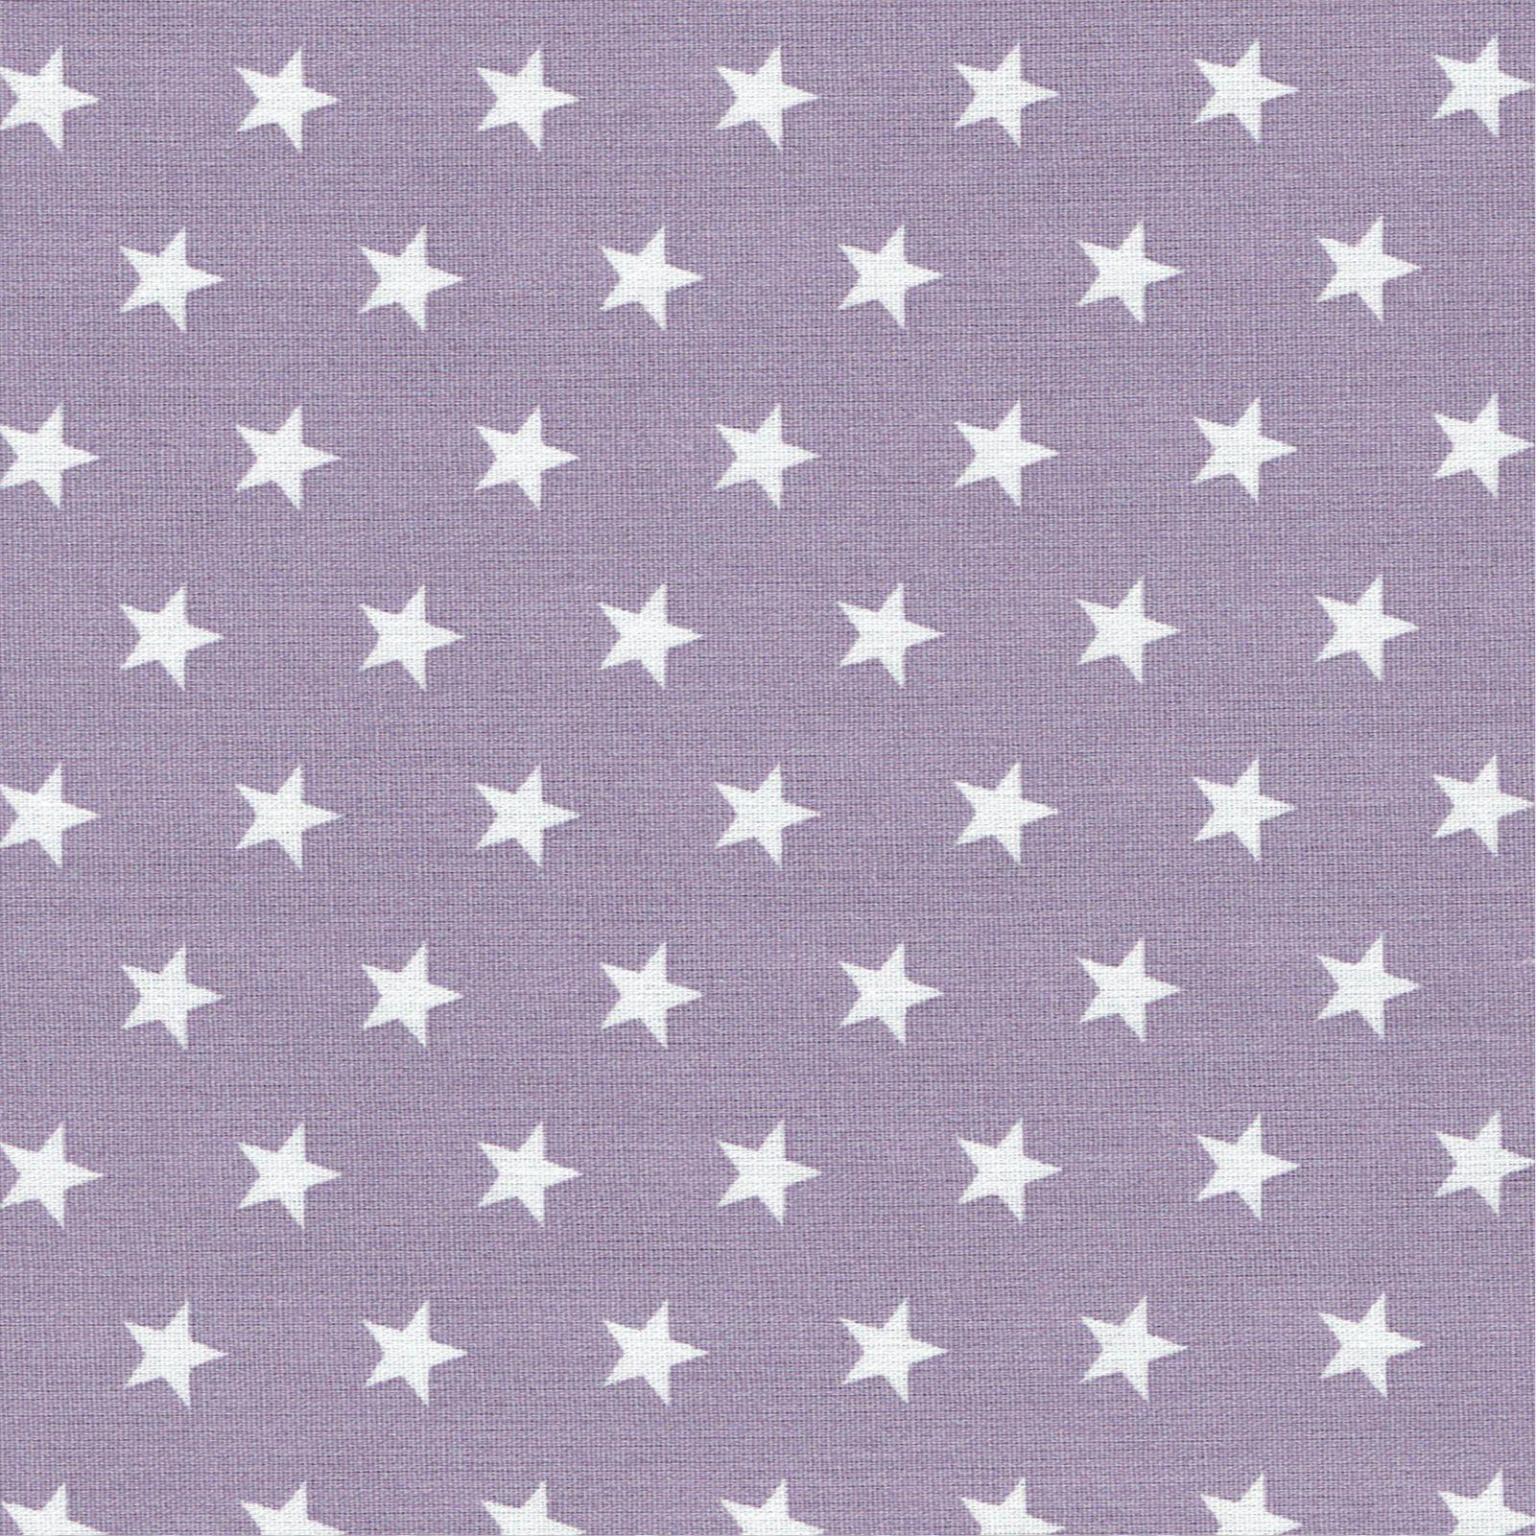 Cotton Fabric | Stars on Lilac Cotton | More Sewing